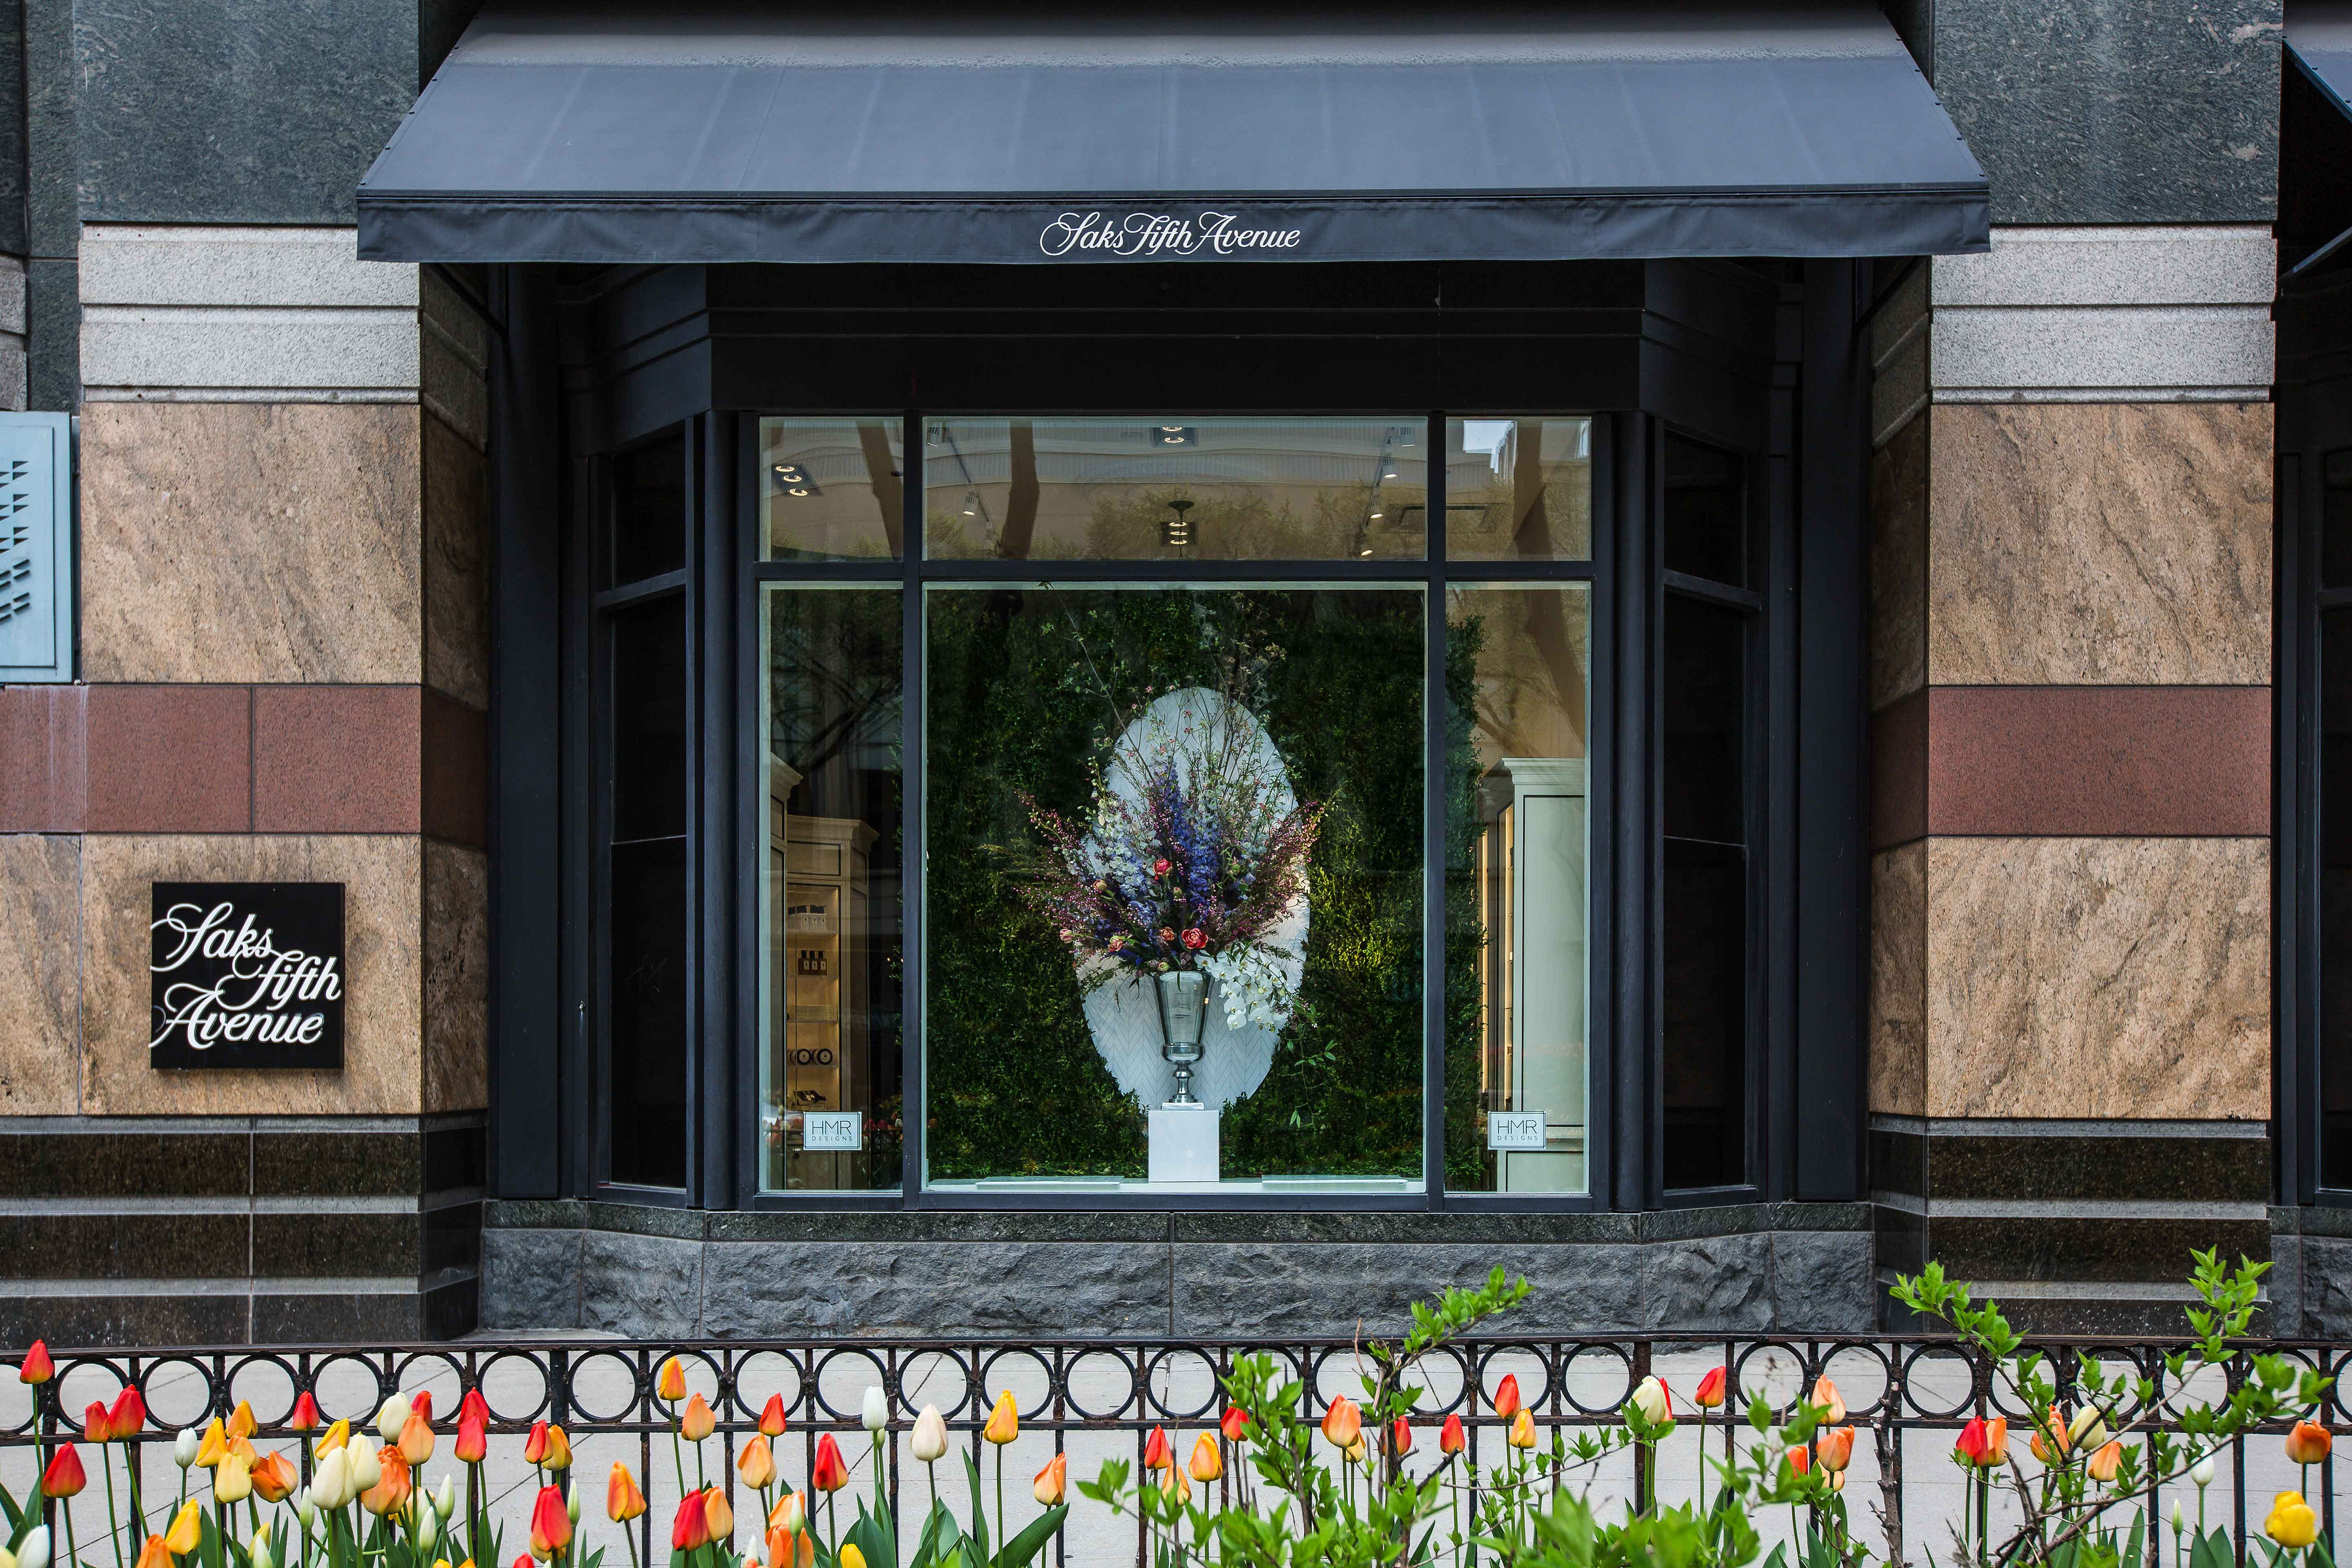 One of two window displays by HMR Designs. Photo by: Spoon Photo & Design